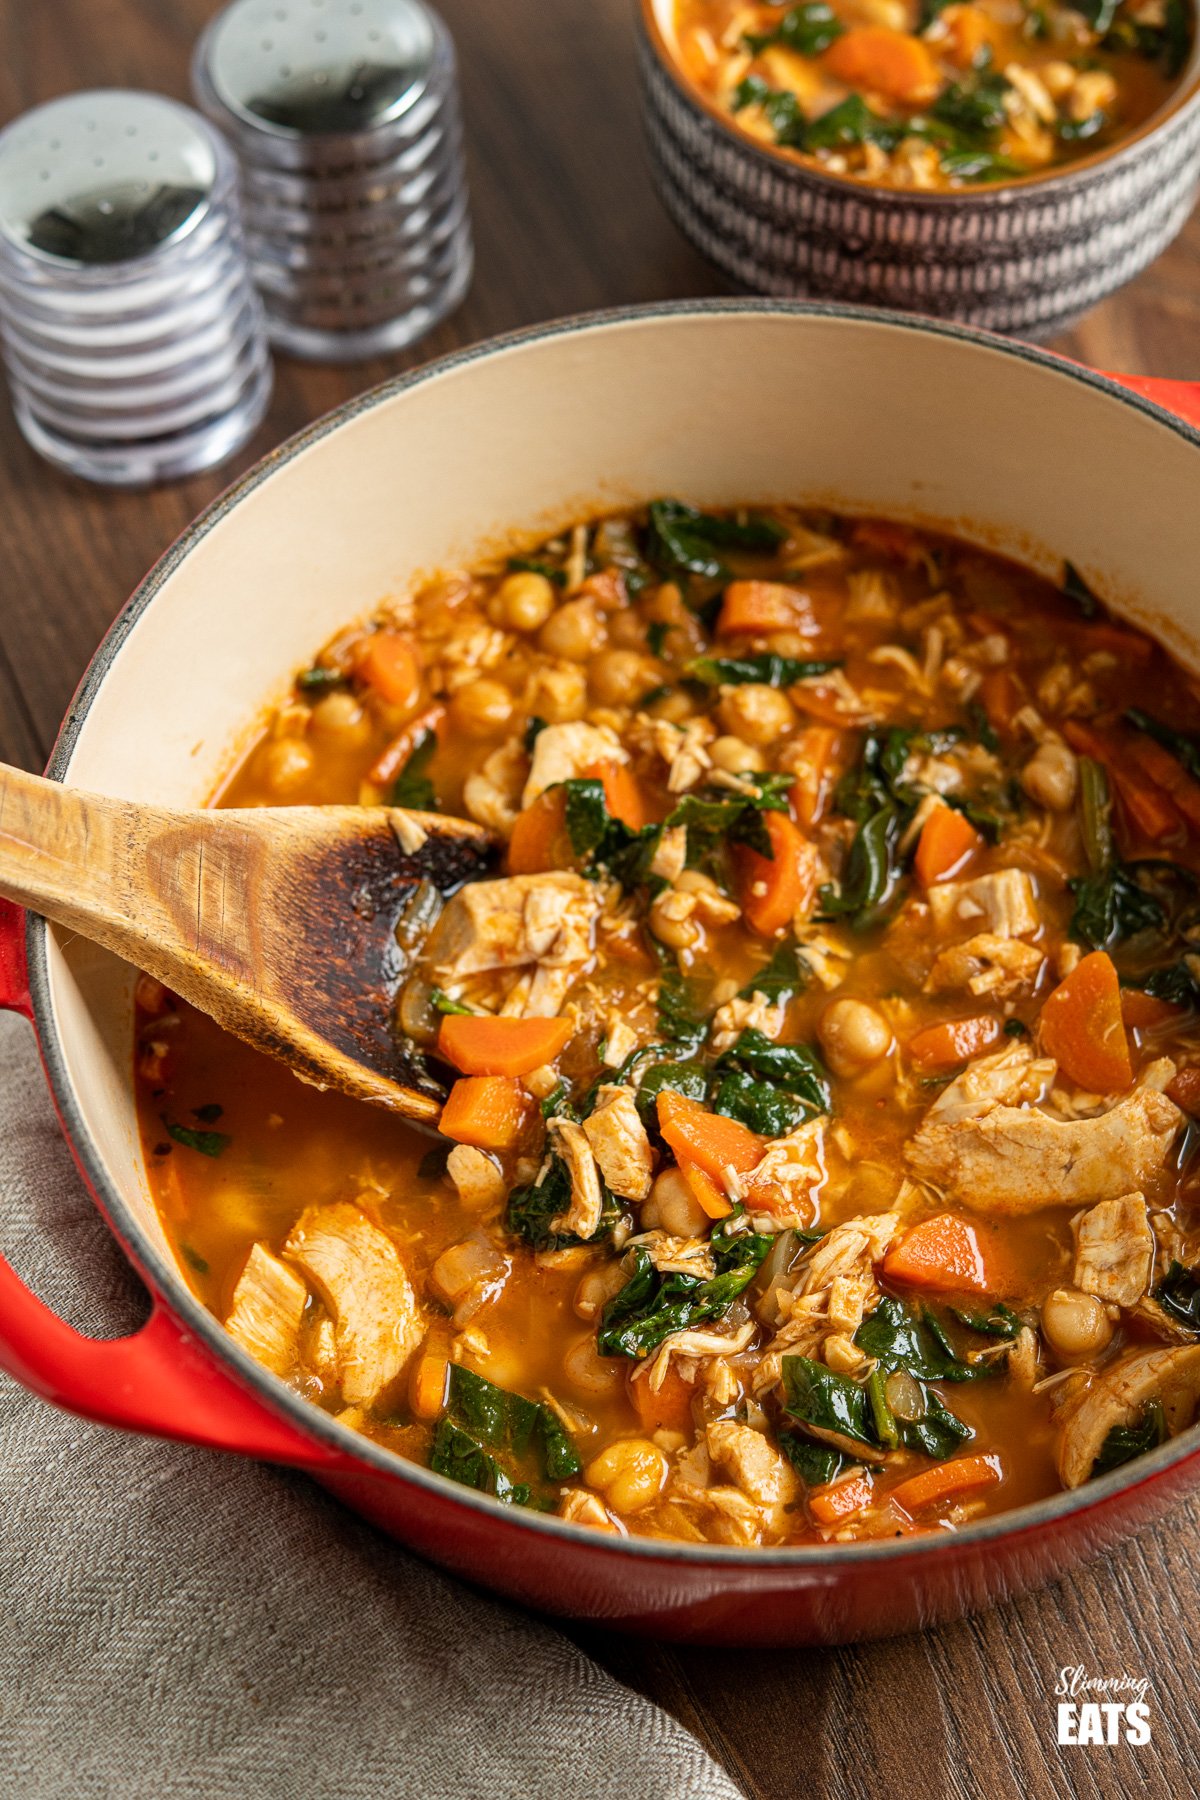 Chicken Chickpea Spinach Soup in red cast iron pot with wooden spoon